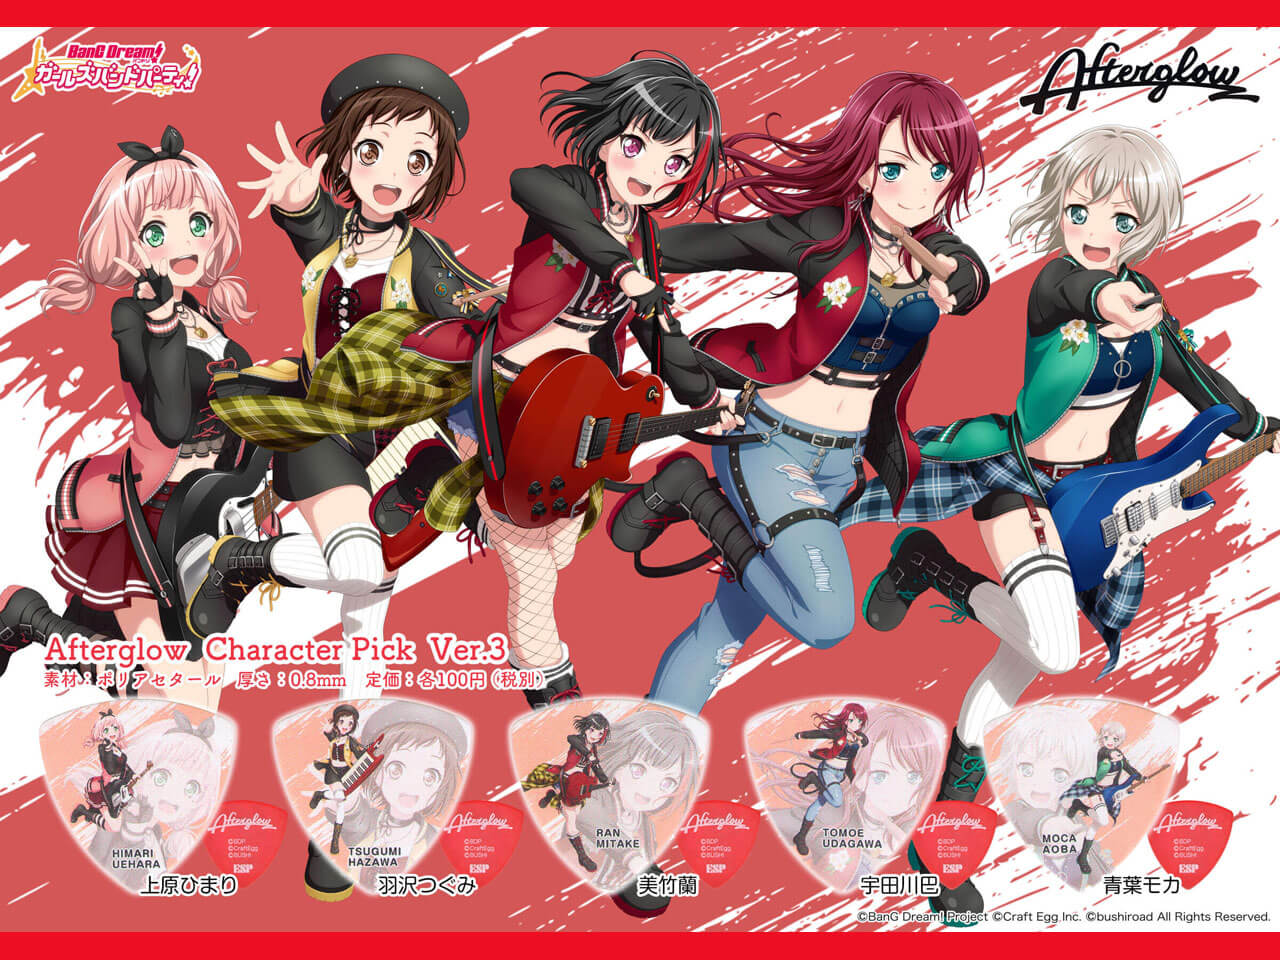 【ESP×BanG Dream!コラボピック】Afterglow Character Pick Ver.3 "羽沢つぐみ"10枚セット（GBP TSUGUMI AFTERGLOW 3）